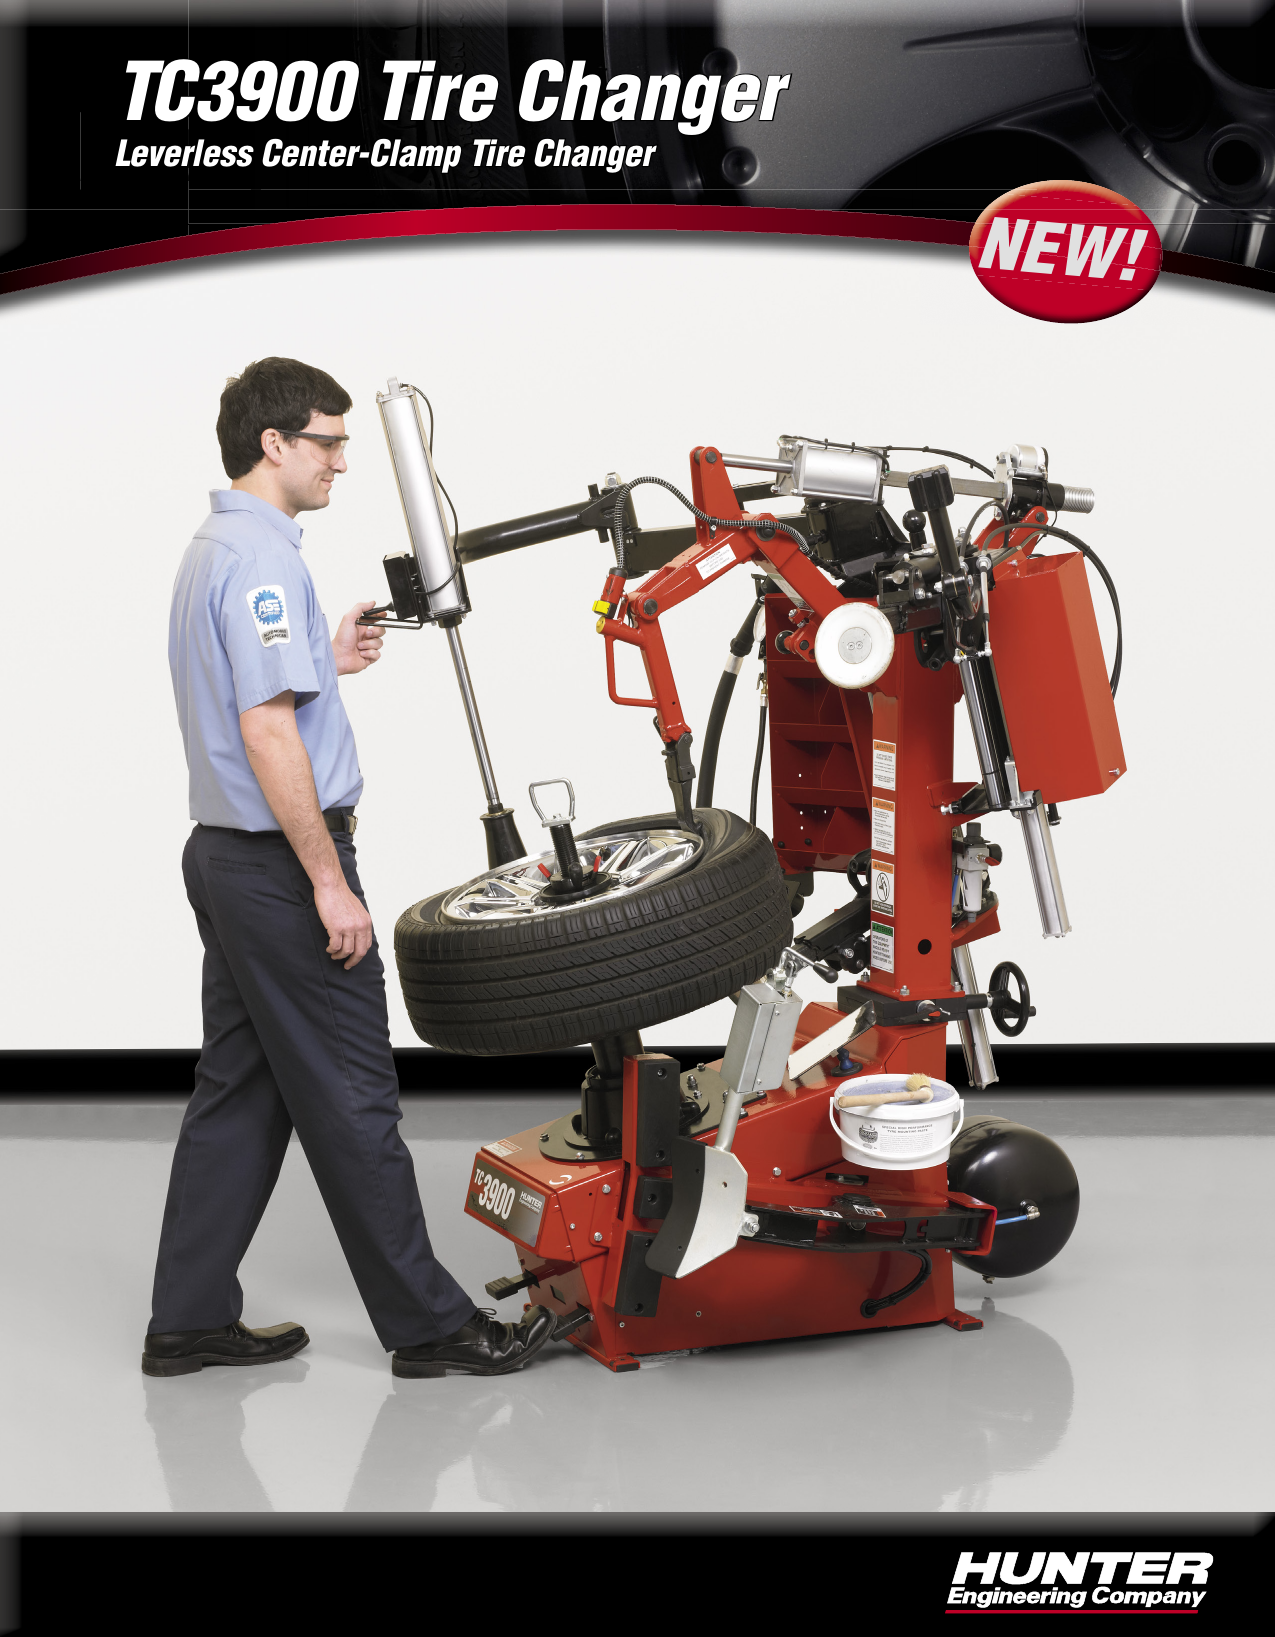 Page 1 of 4 - Hunter-Engineering Hunter-Engineering-Center-Clamp-Brochure- TC3900 Tire Changer - Leverless Center-Clamp  Hunter-engineering-center-clamp-brochure